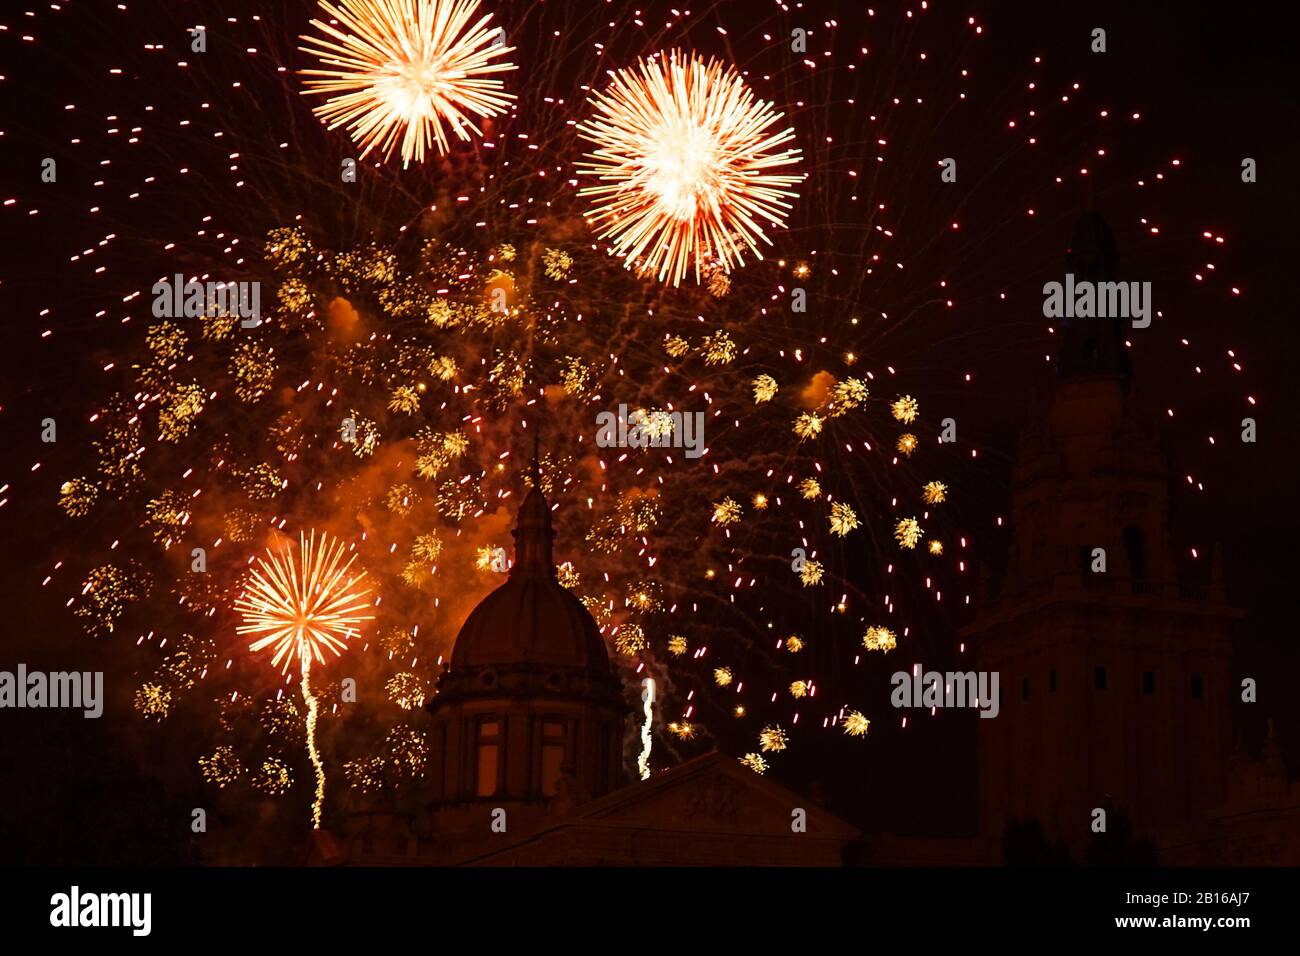 fireworks in a dark sky showing the silhouette of a domed building Stock Photo